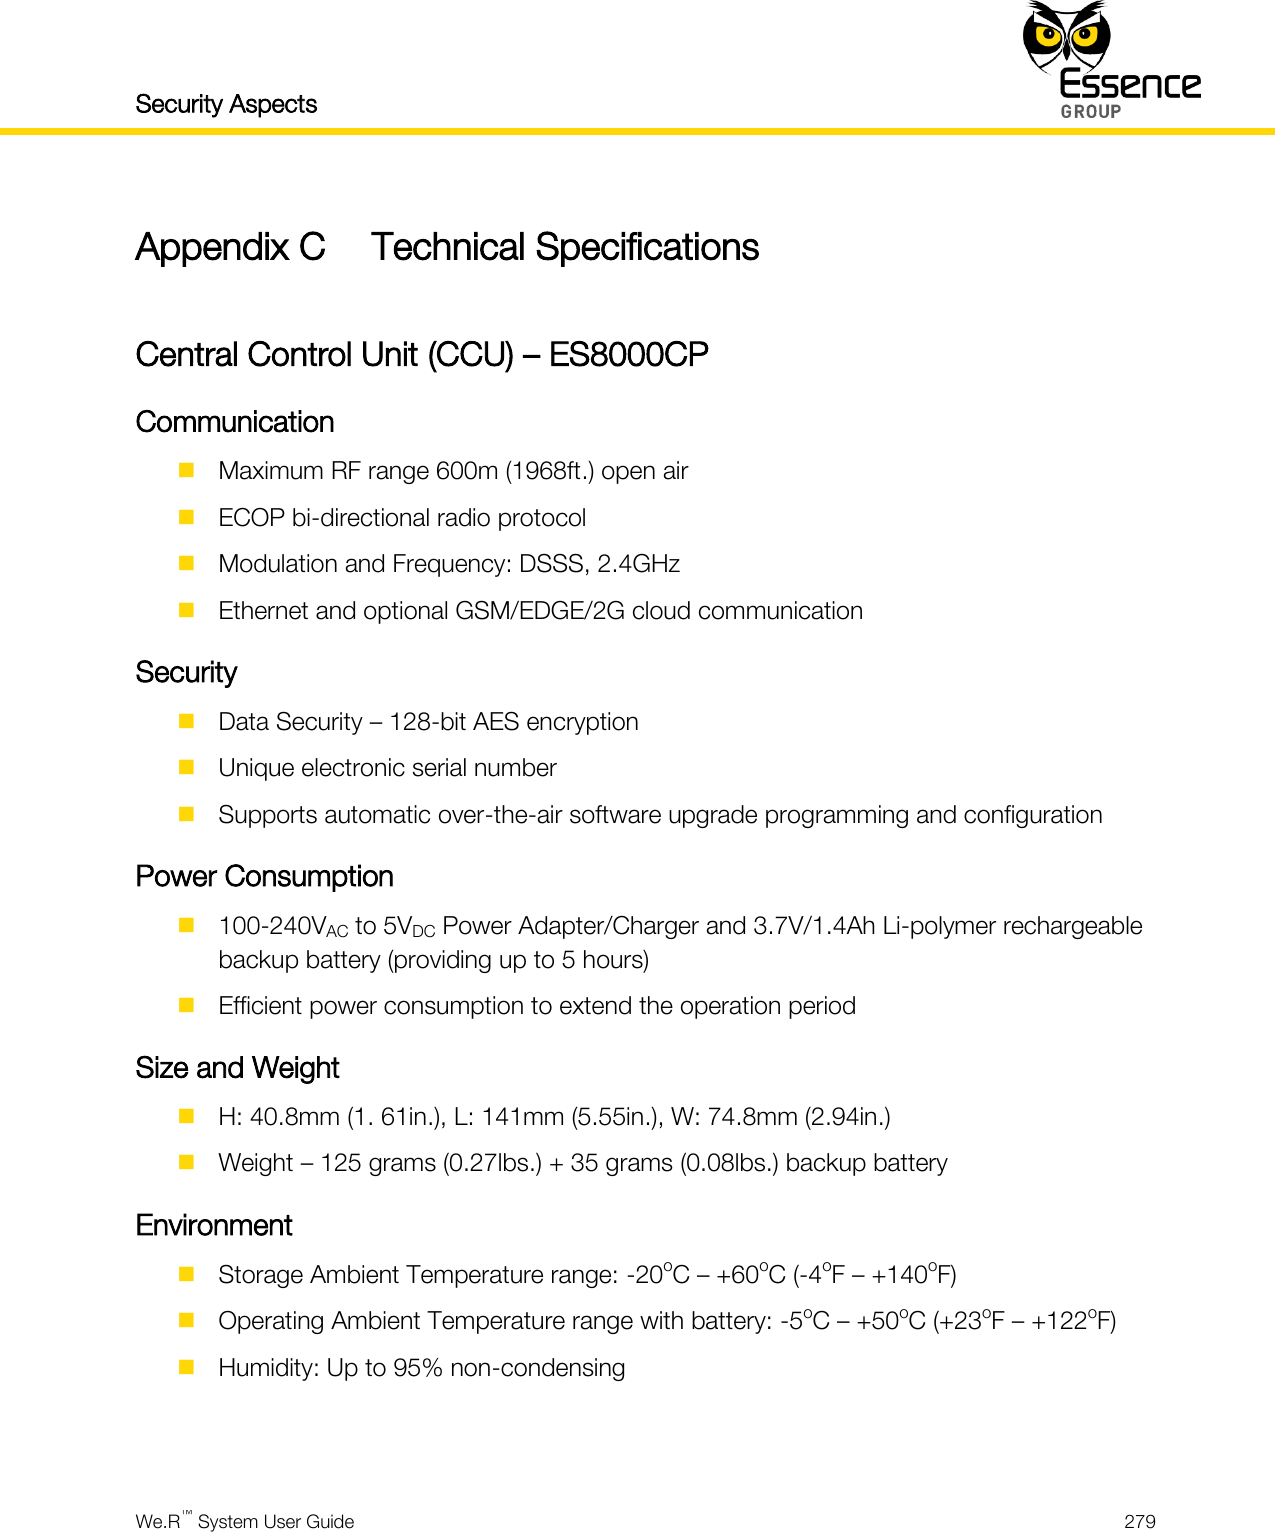 Security Aspects    We.R™ System User Guide  279  Appendix C Technical Specifications  Central Control Unit (CCU) – ES8000CP Communication  Maximum RF range 600m (1968ft.) open air  ECOP bi-directional radio protocol  Modulation and Frequency: DSSS, 2.4GHz  Ethernet and optional GSM/EDGE/2G cloud communication Security  Data Security – 128-bit AES encryption  Unique electronic serial number  Supports automatic over-the-air software upgrade programming and configuration Power Consumption  100-240VAC to 5VDC Power Adapter/Charger and 3.7V/1.4Ah Li-polymer rechargeable backup battery (providing up to 5 hours)  Efficient power consumption to extend the operation period Size and Weight  H: 40.8mm (1. 61in.), L: 141mm (5.55in.), W: 74.8mm (2.94in.)  Weight – 125 grams (0.27lbs.) + 35 grams (0.08lbs.) backup battery Environment  Storage Ambient Temperature range: -20oC – +60oC (-4oF – +140oF)  Operating Ambient Temperature range with battery: -5oC – +50oC (+23oF – +122oF)  Humidity: Up to 95% non-condensing   